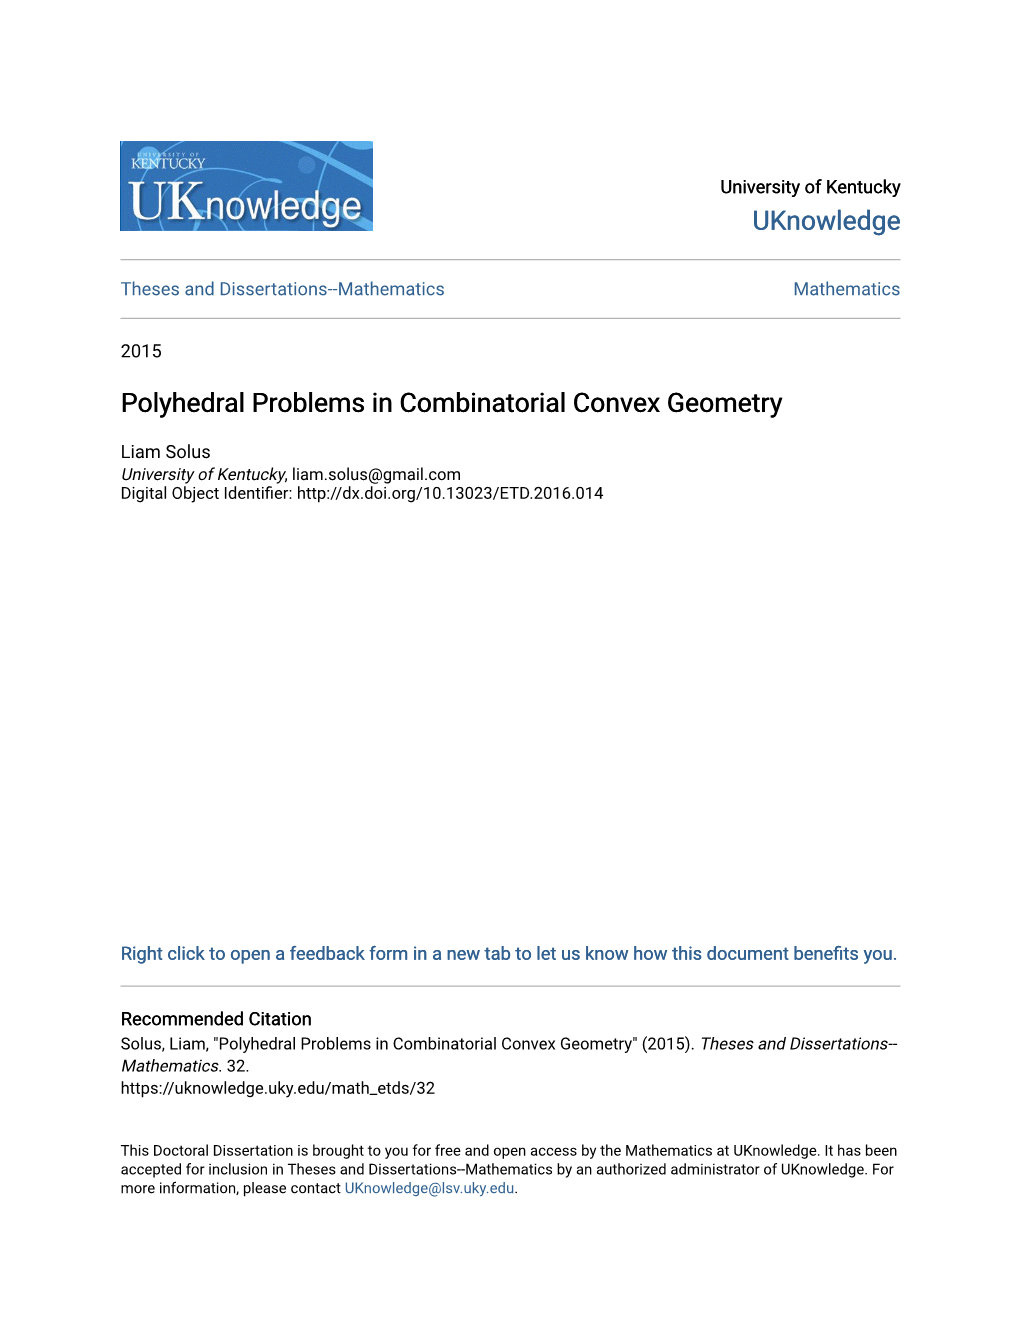 Polyhedral Problems in Combinatorial Convex Geometry